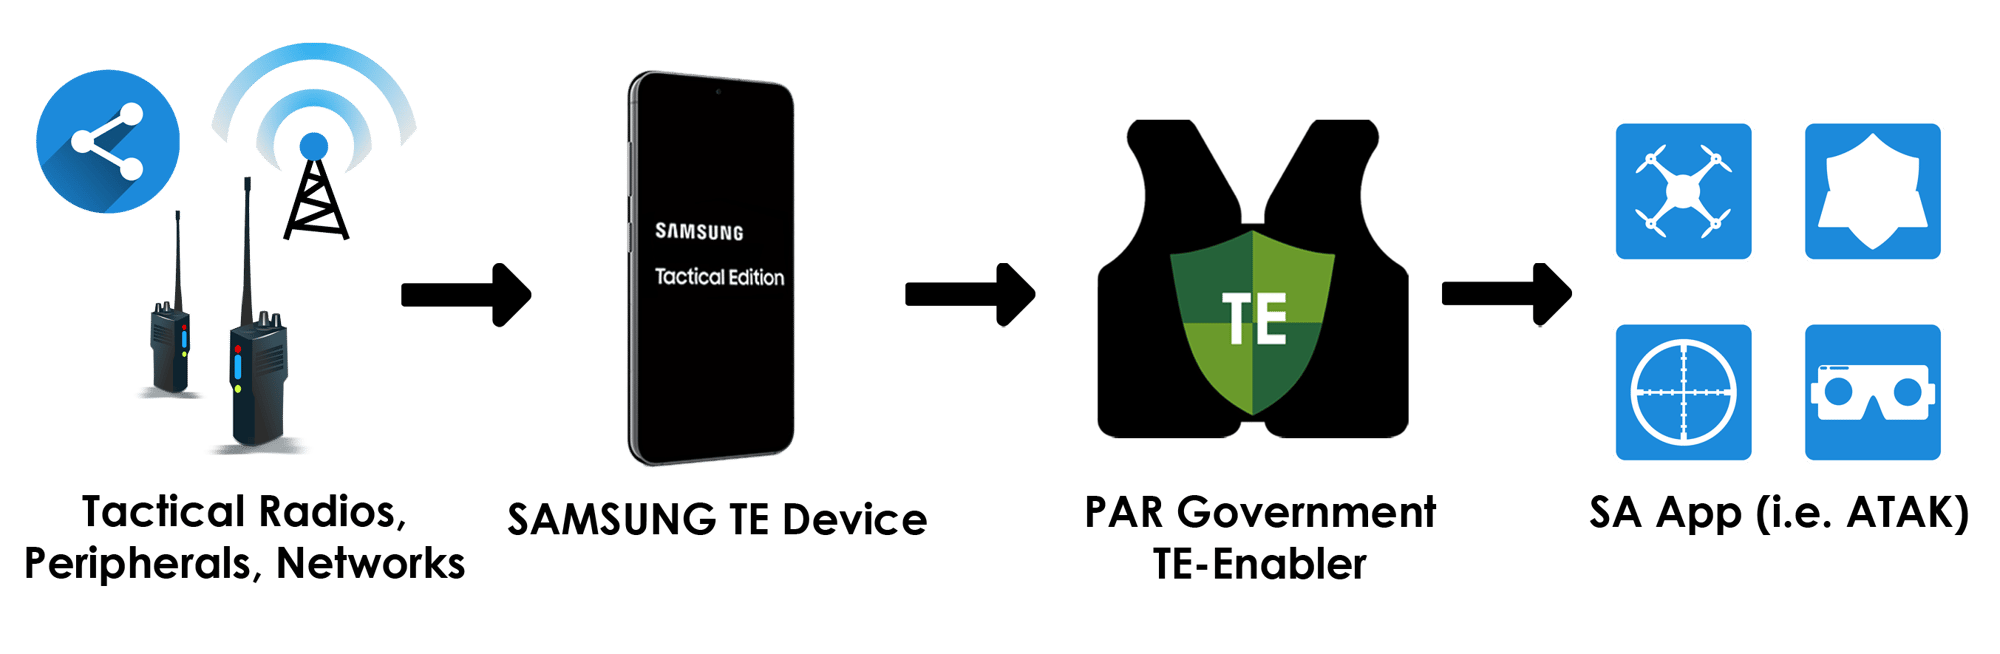 Infographic showing TE-Enabler integration.